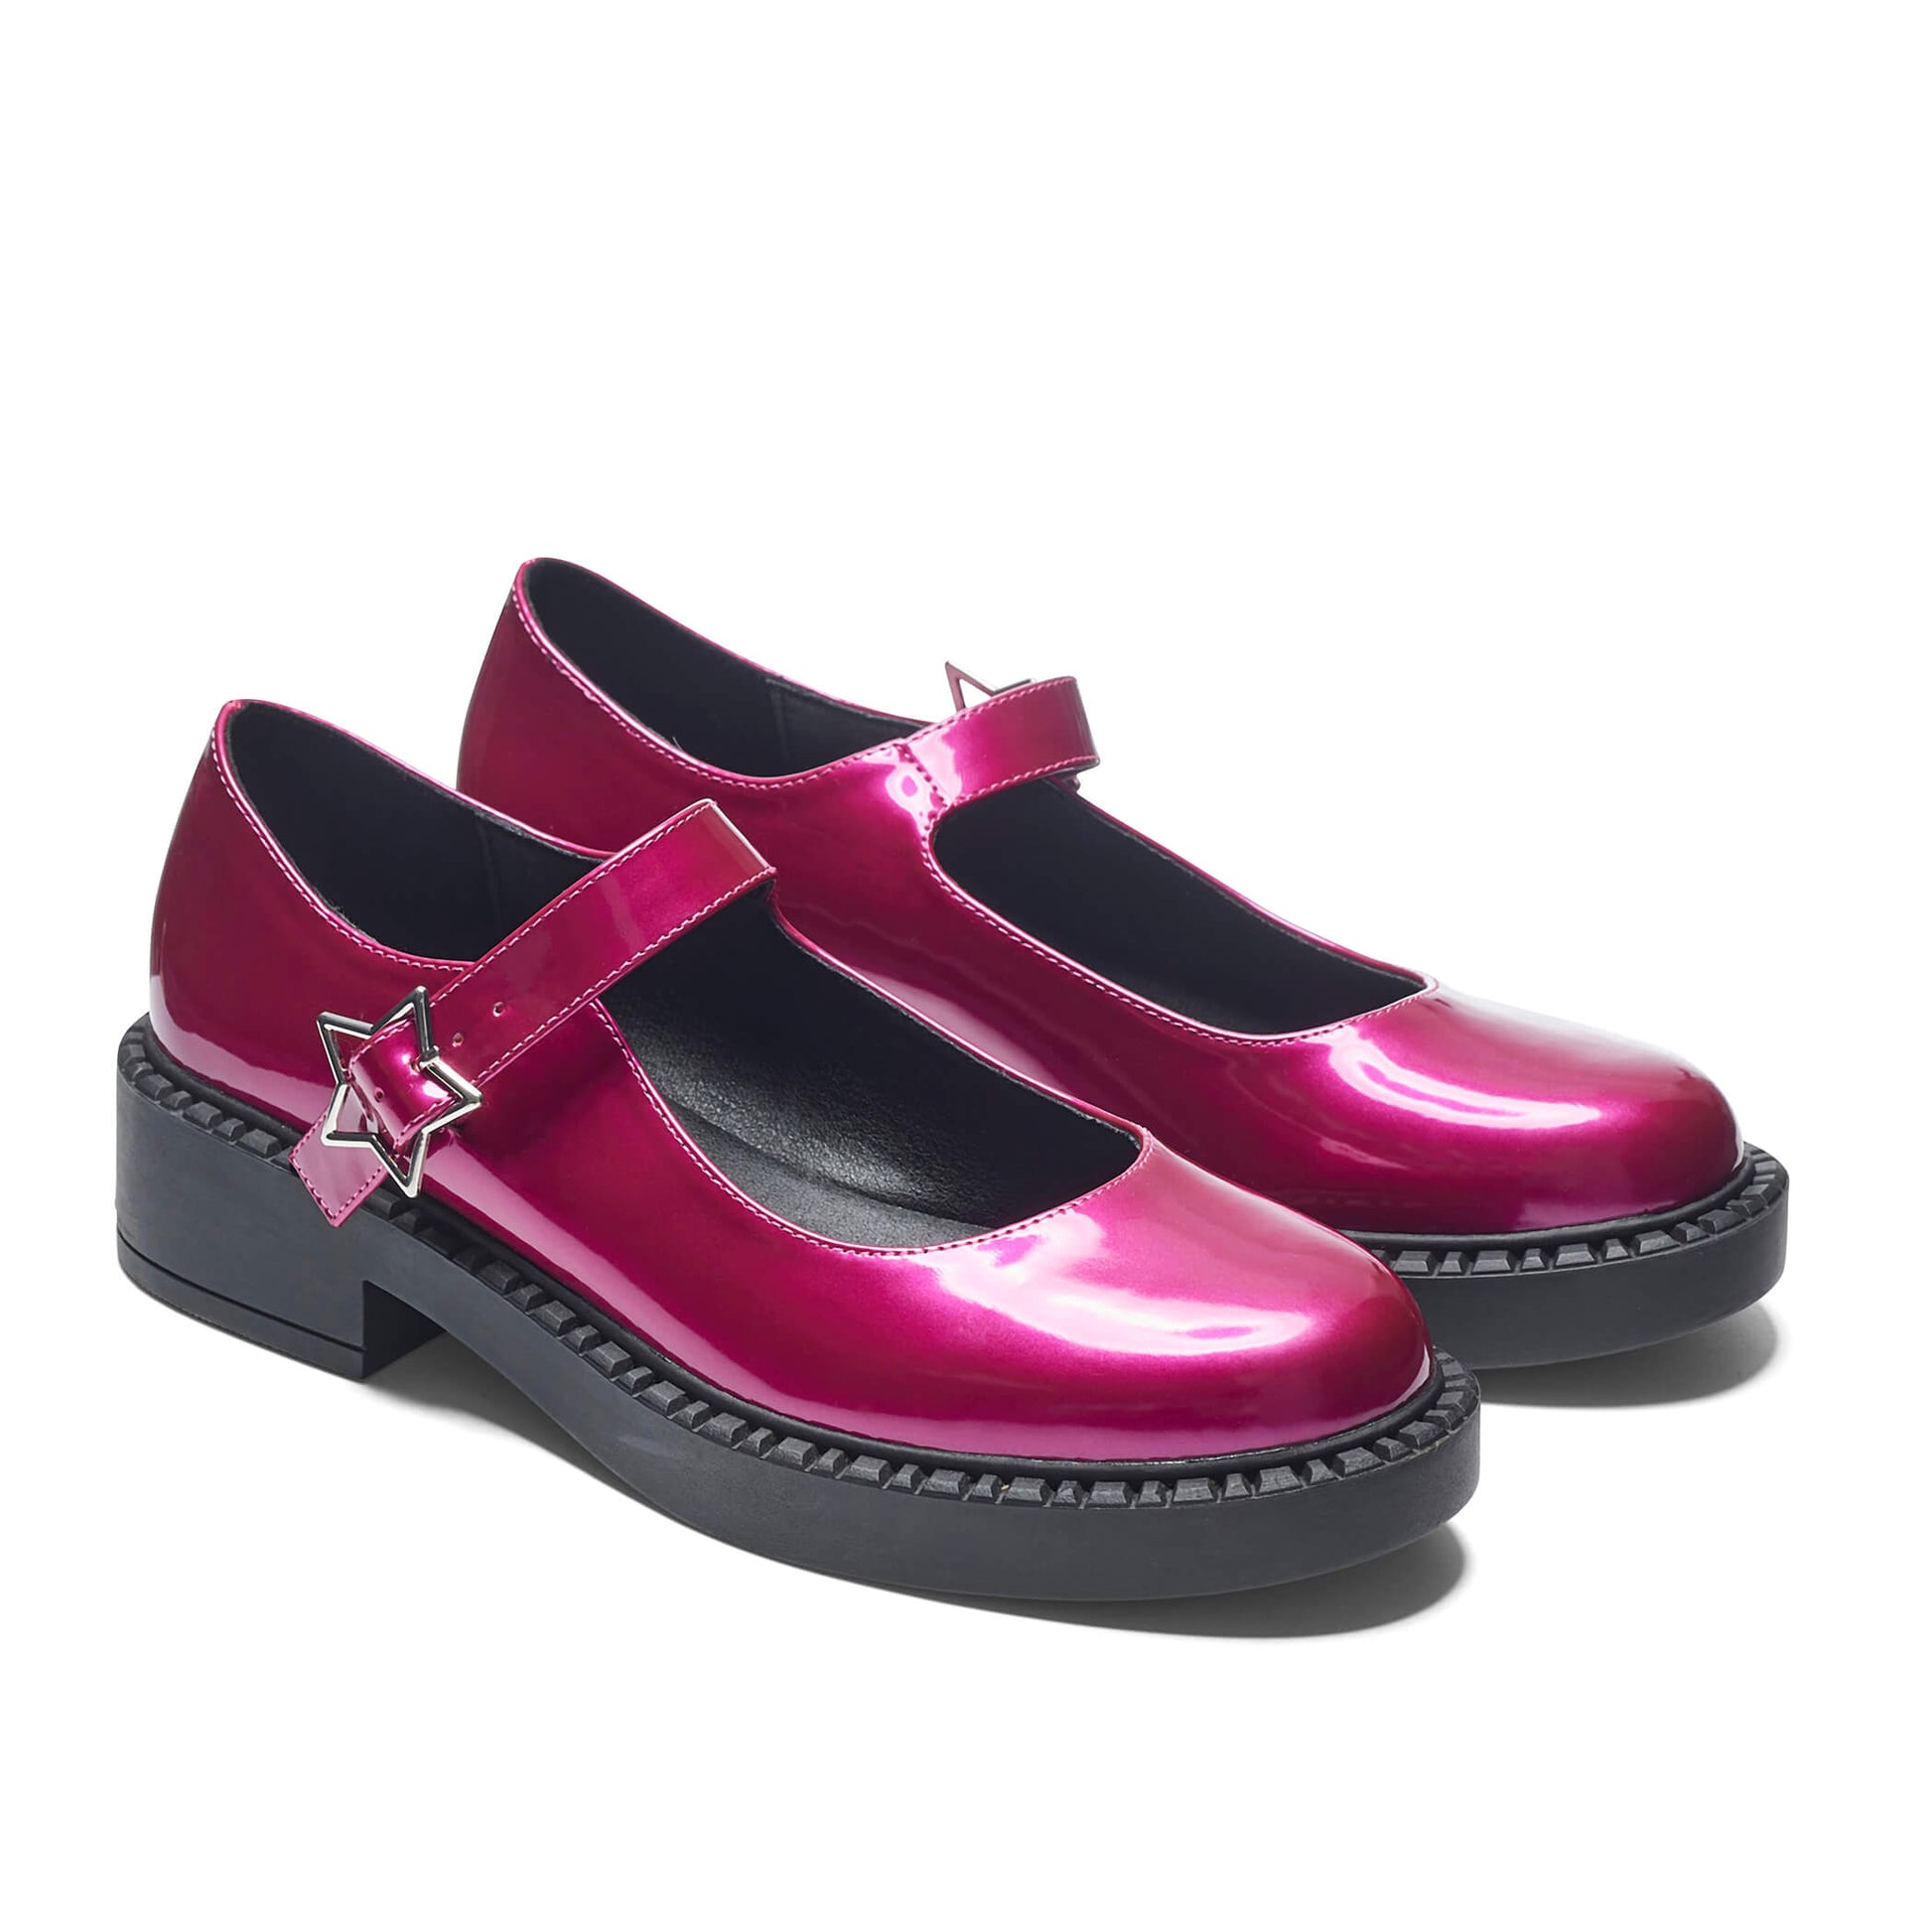 Astral Prime Tale Mary Janes - Candy Pink - KOI Footwear - Three-Quarters View